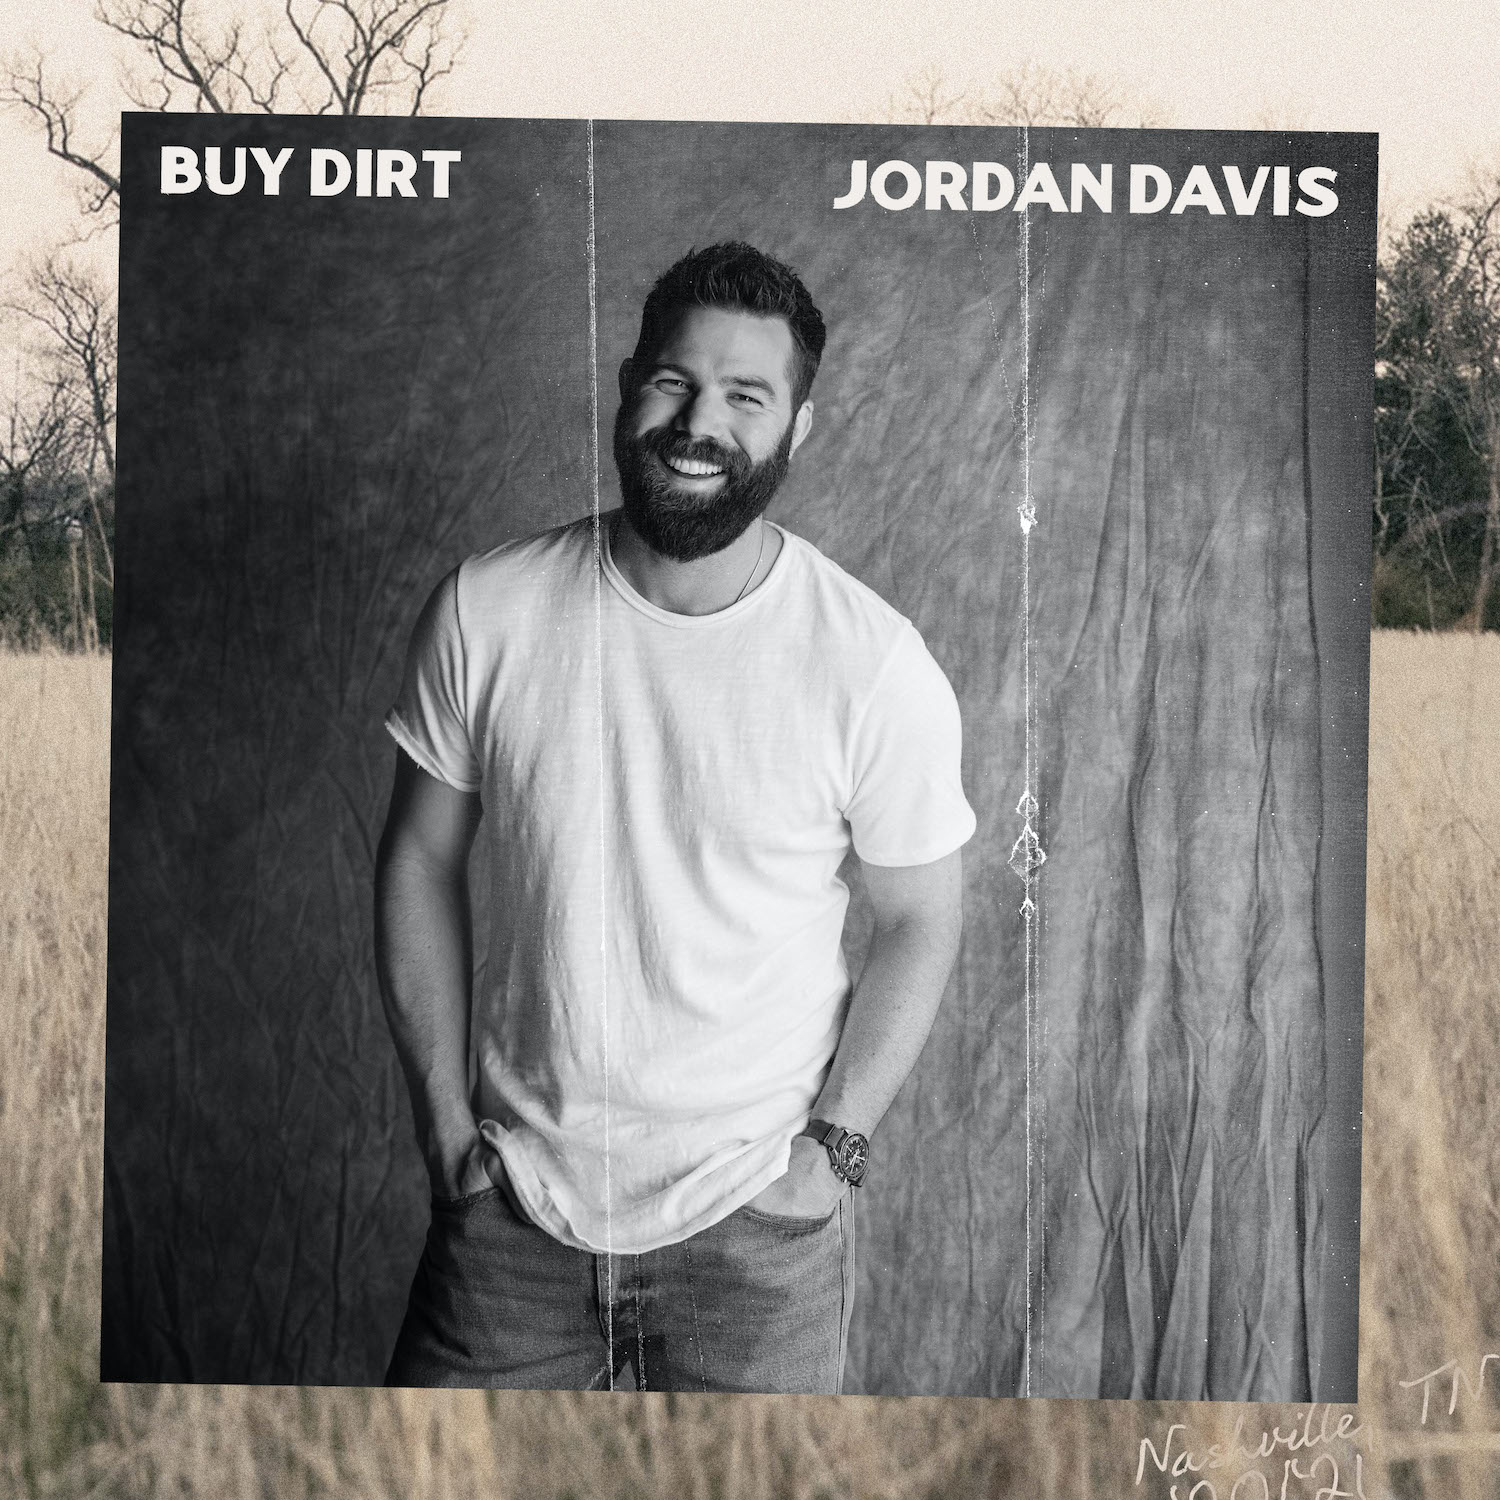 Jordan Davis Announces New EP Buy Dirt to Be Released This Month